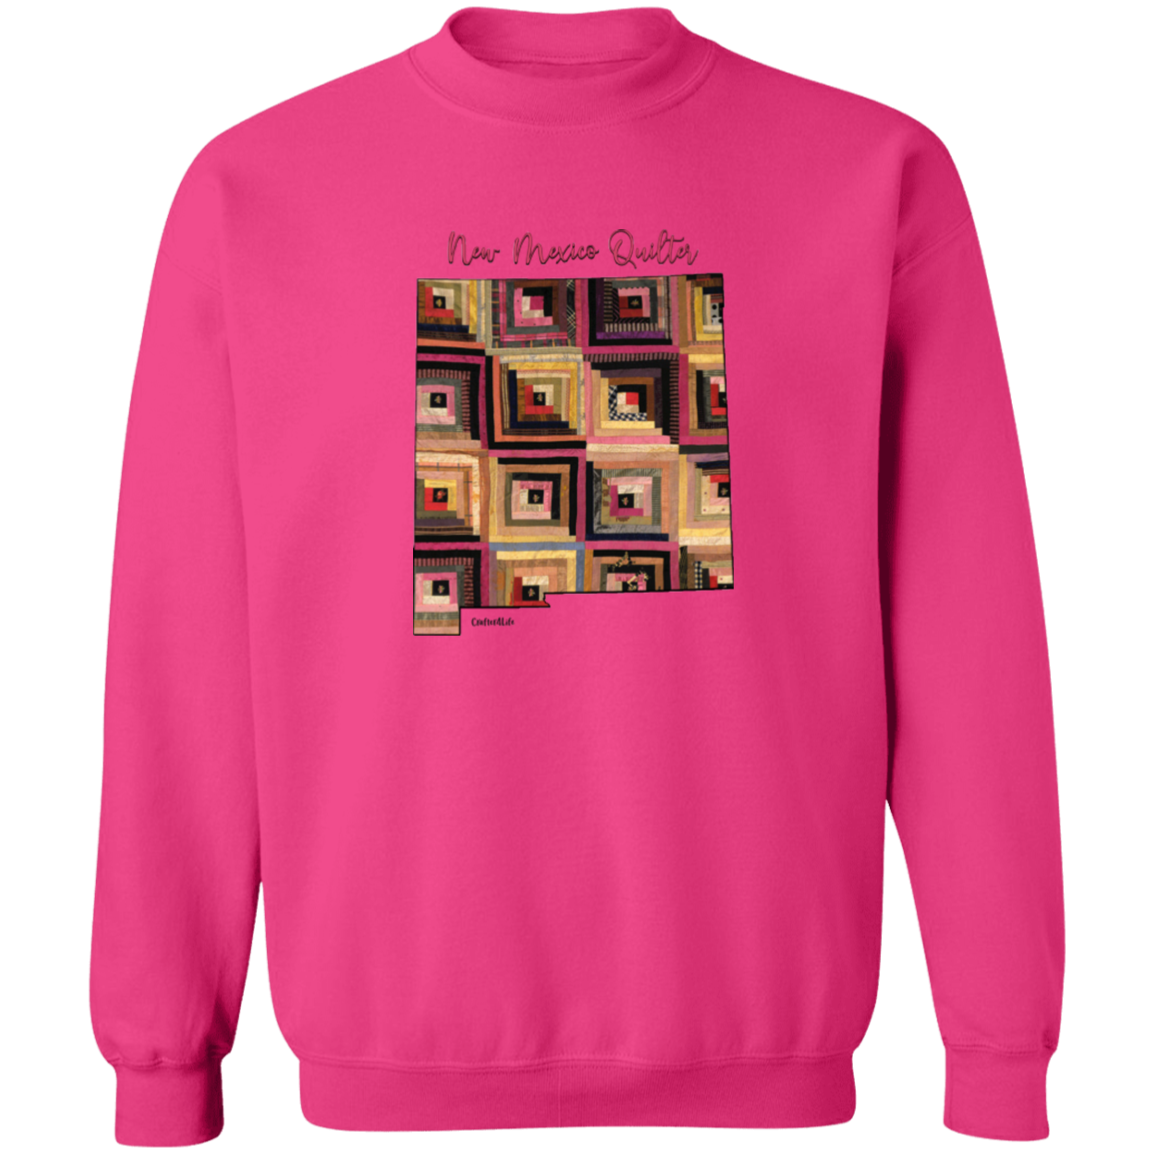 New Mexico Quilter Sweatshirt